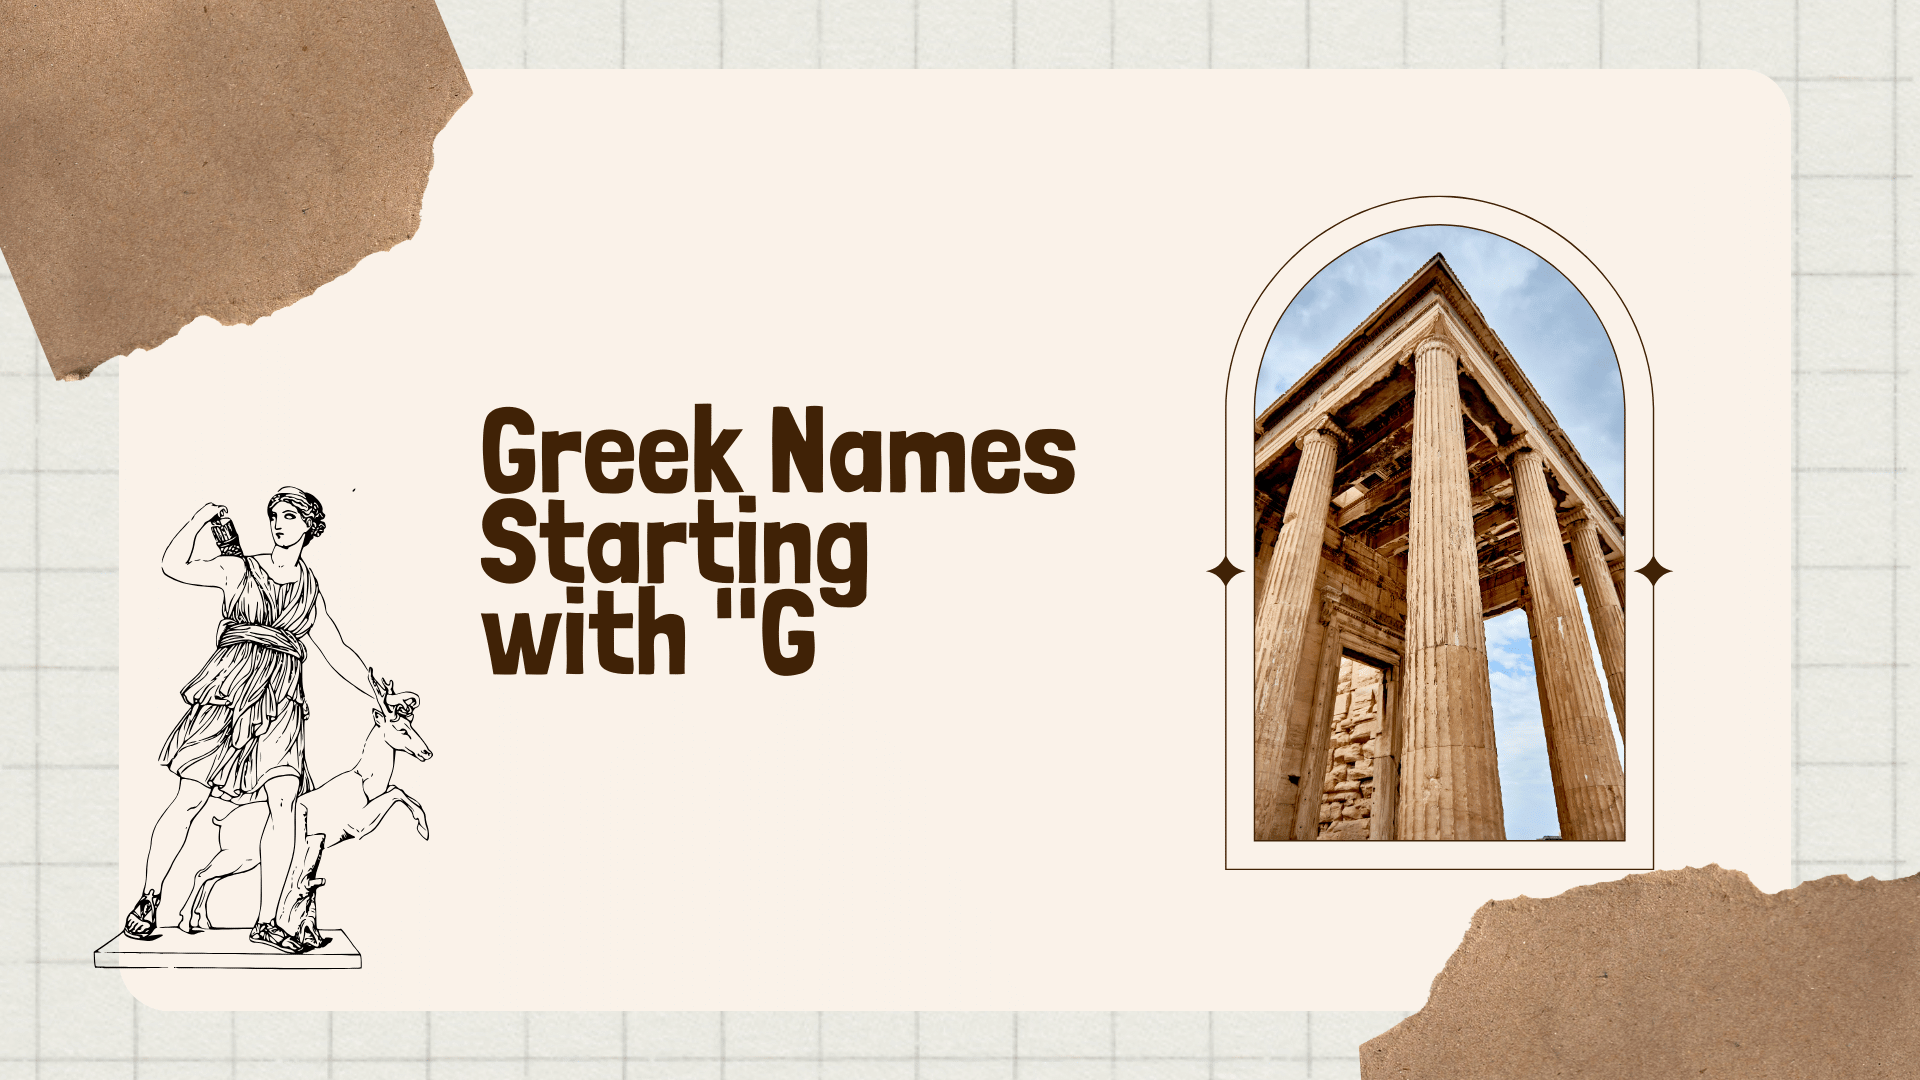 Greek Names Starting with "G"